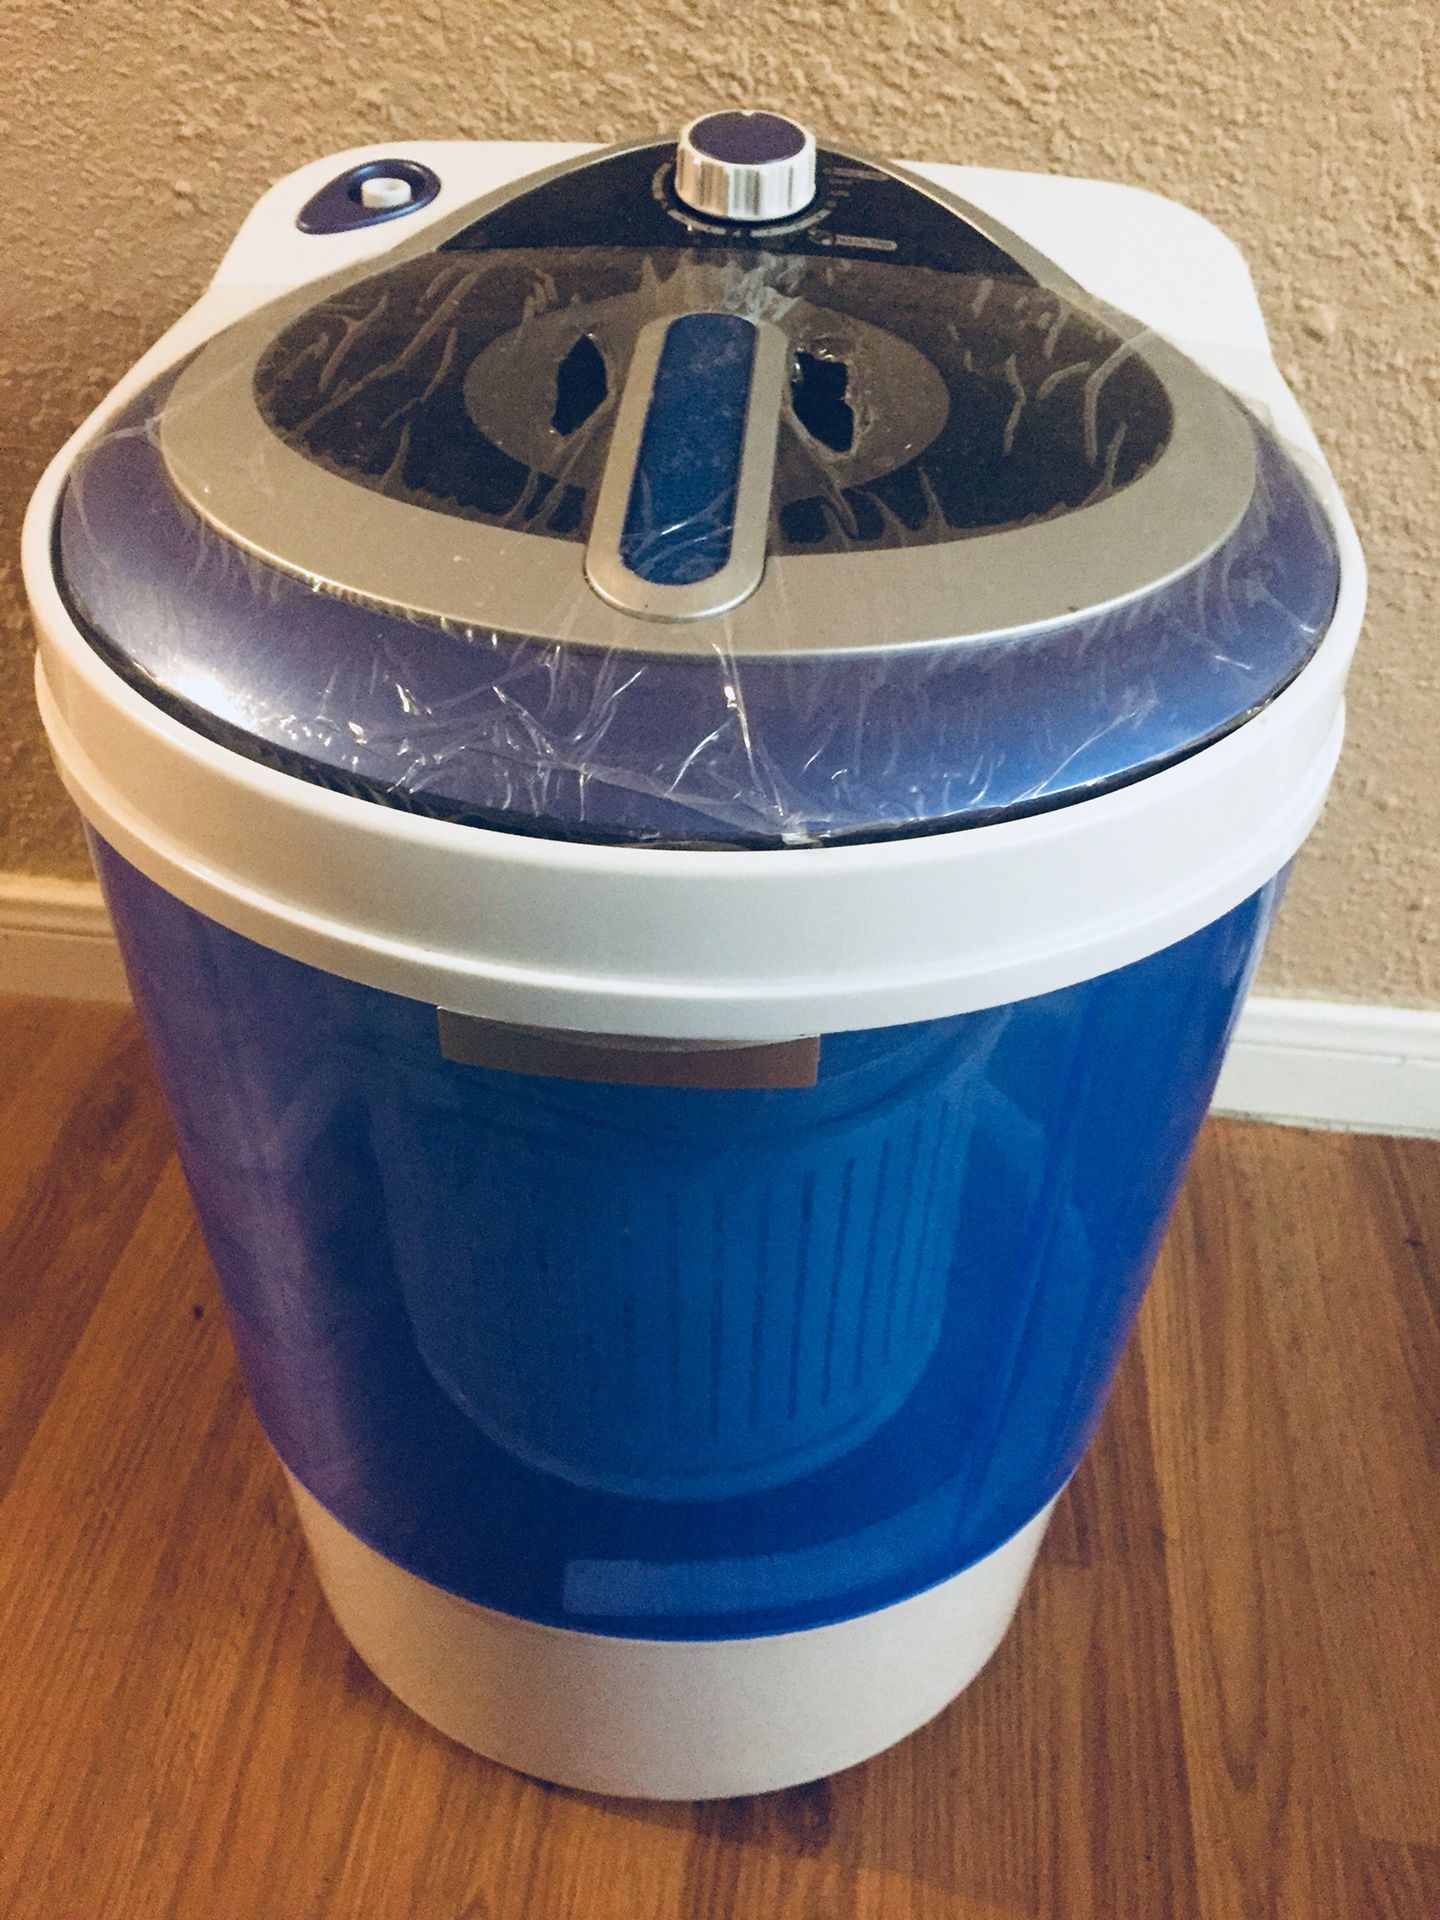 FATHER’s DAY SPECIAL—NEW ENSUE MINI PORTABLE WASHER & SPIN DRYER